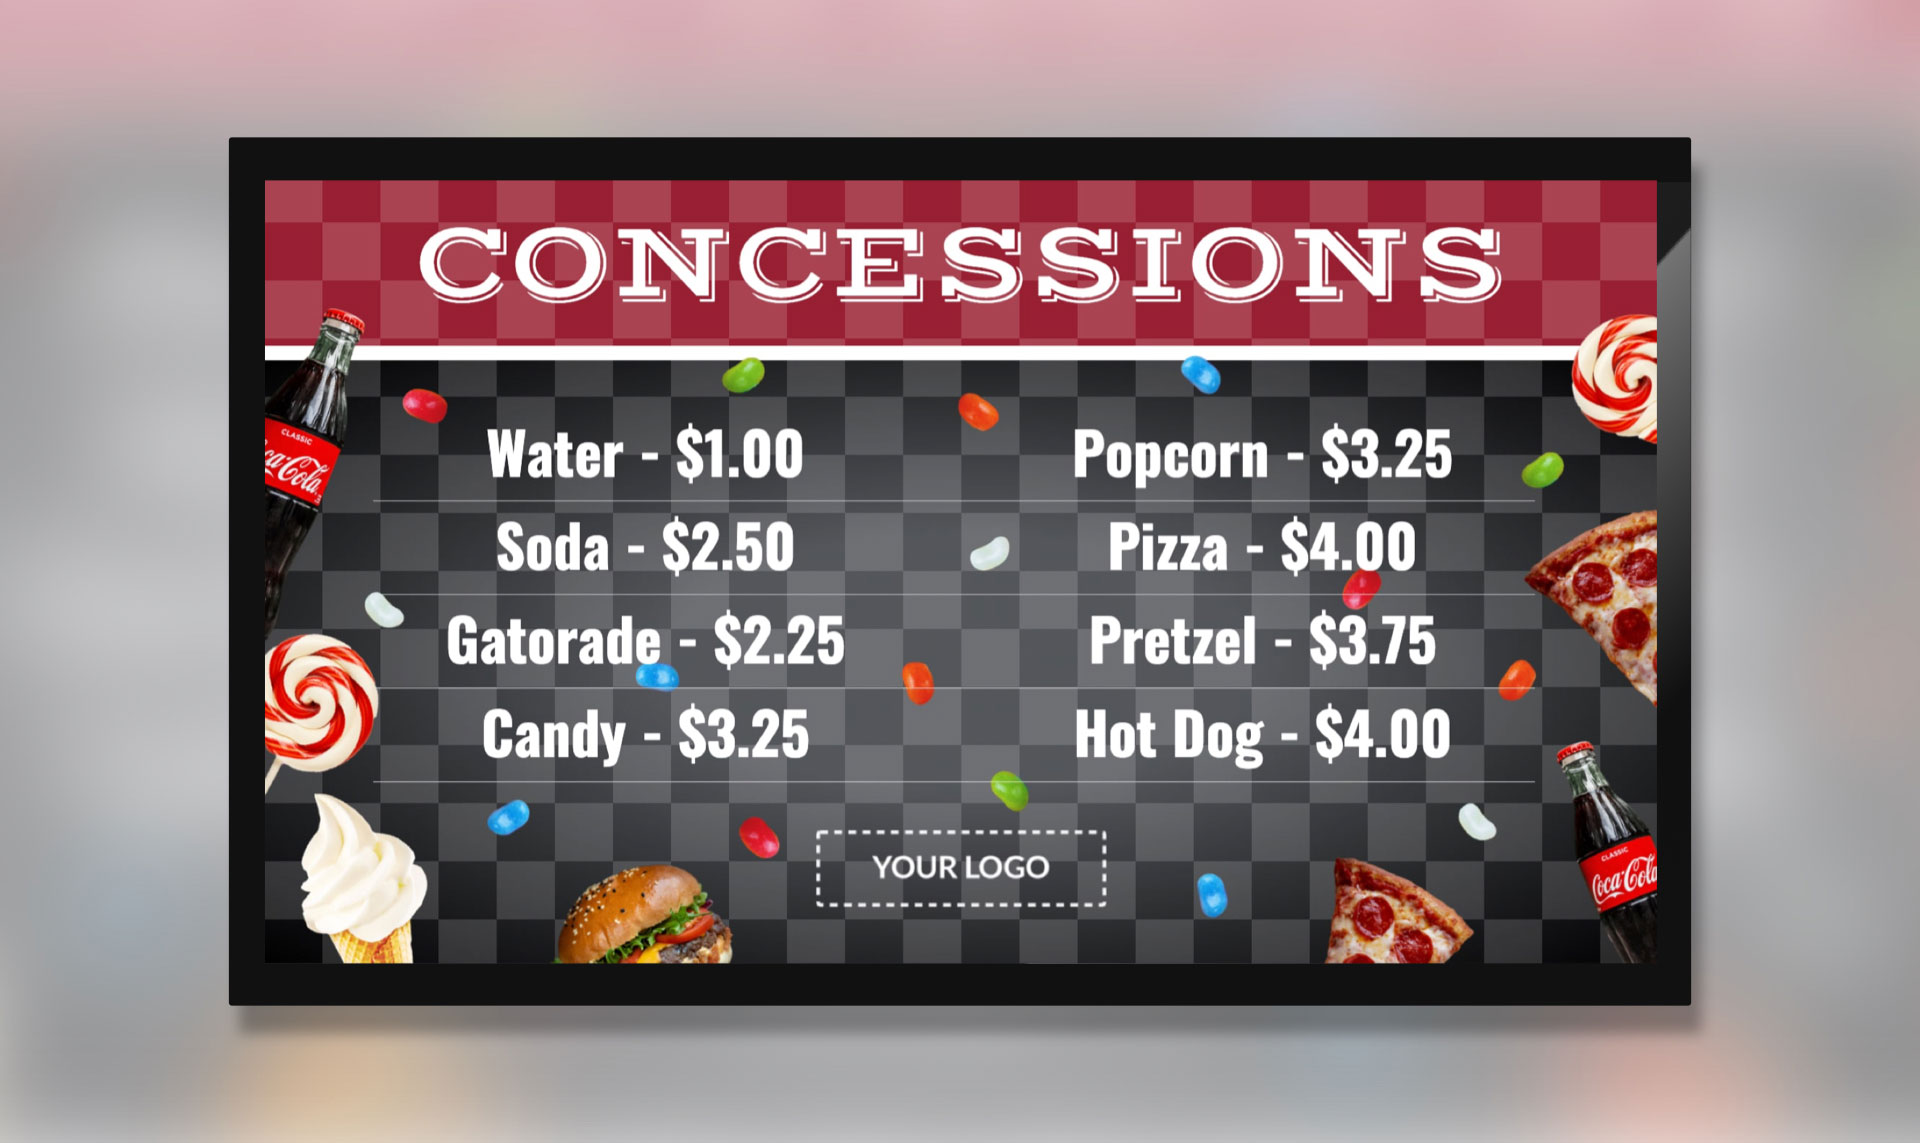 Concession Stand Template for Digital Signage  Claire Hansen With Concession Stand Menu Template